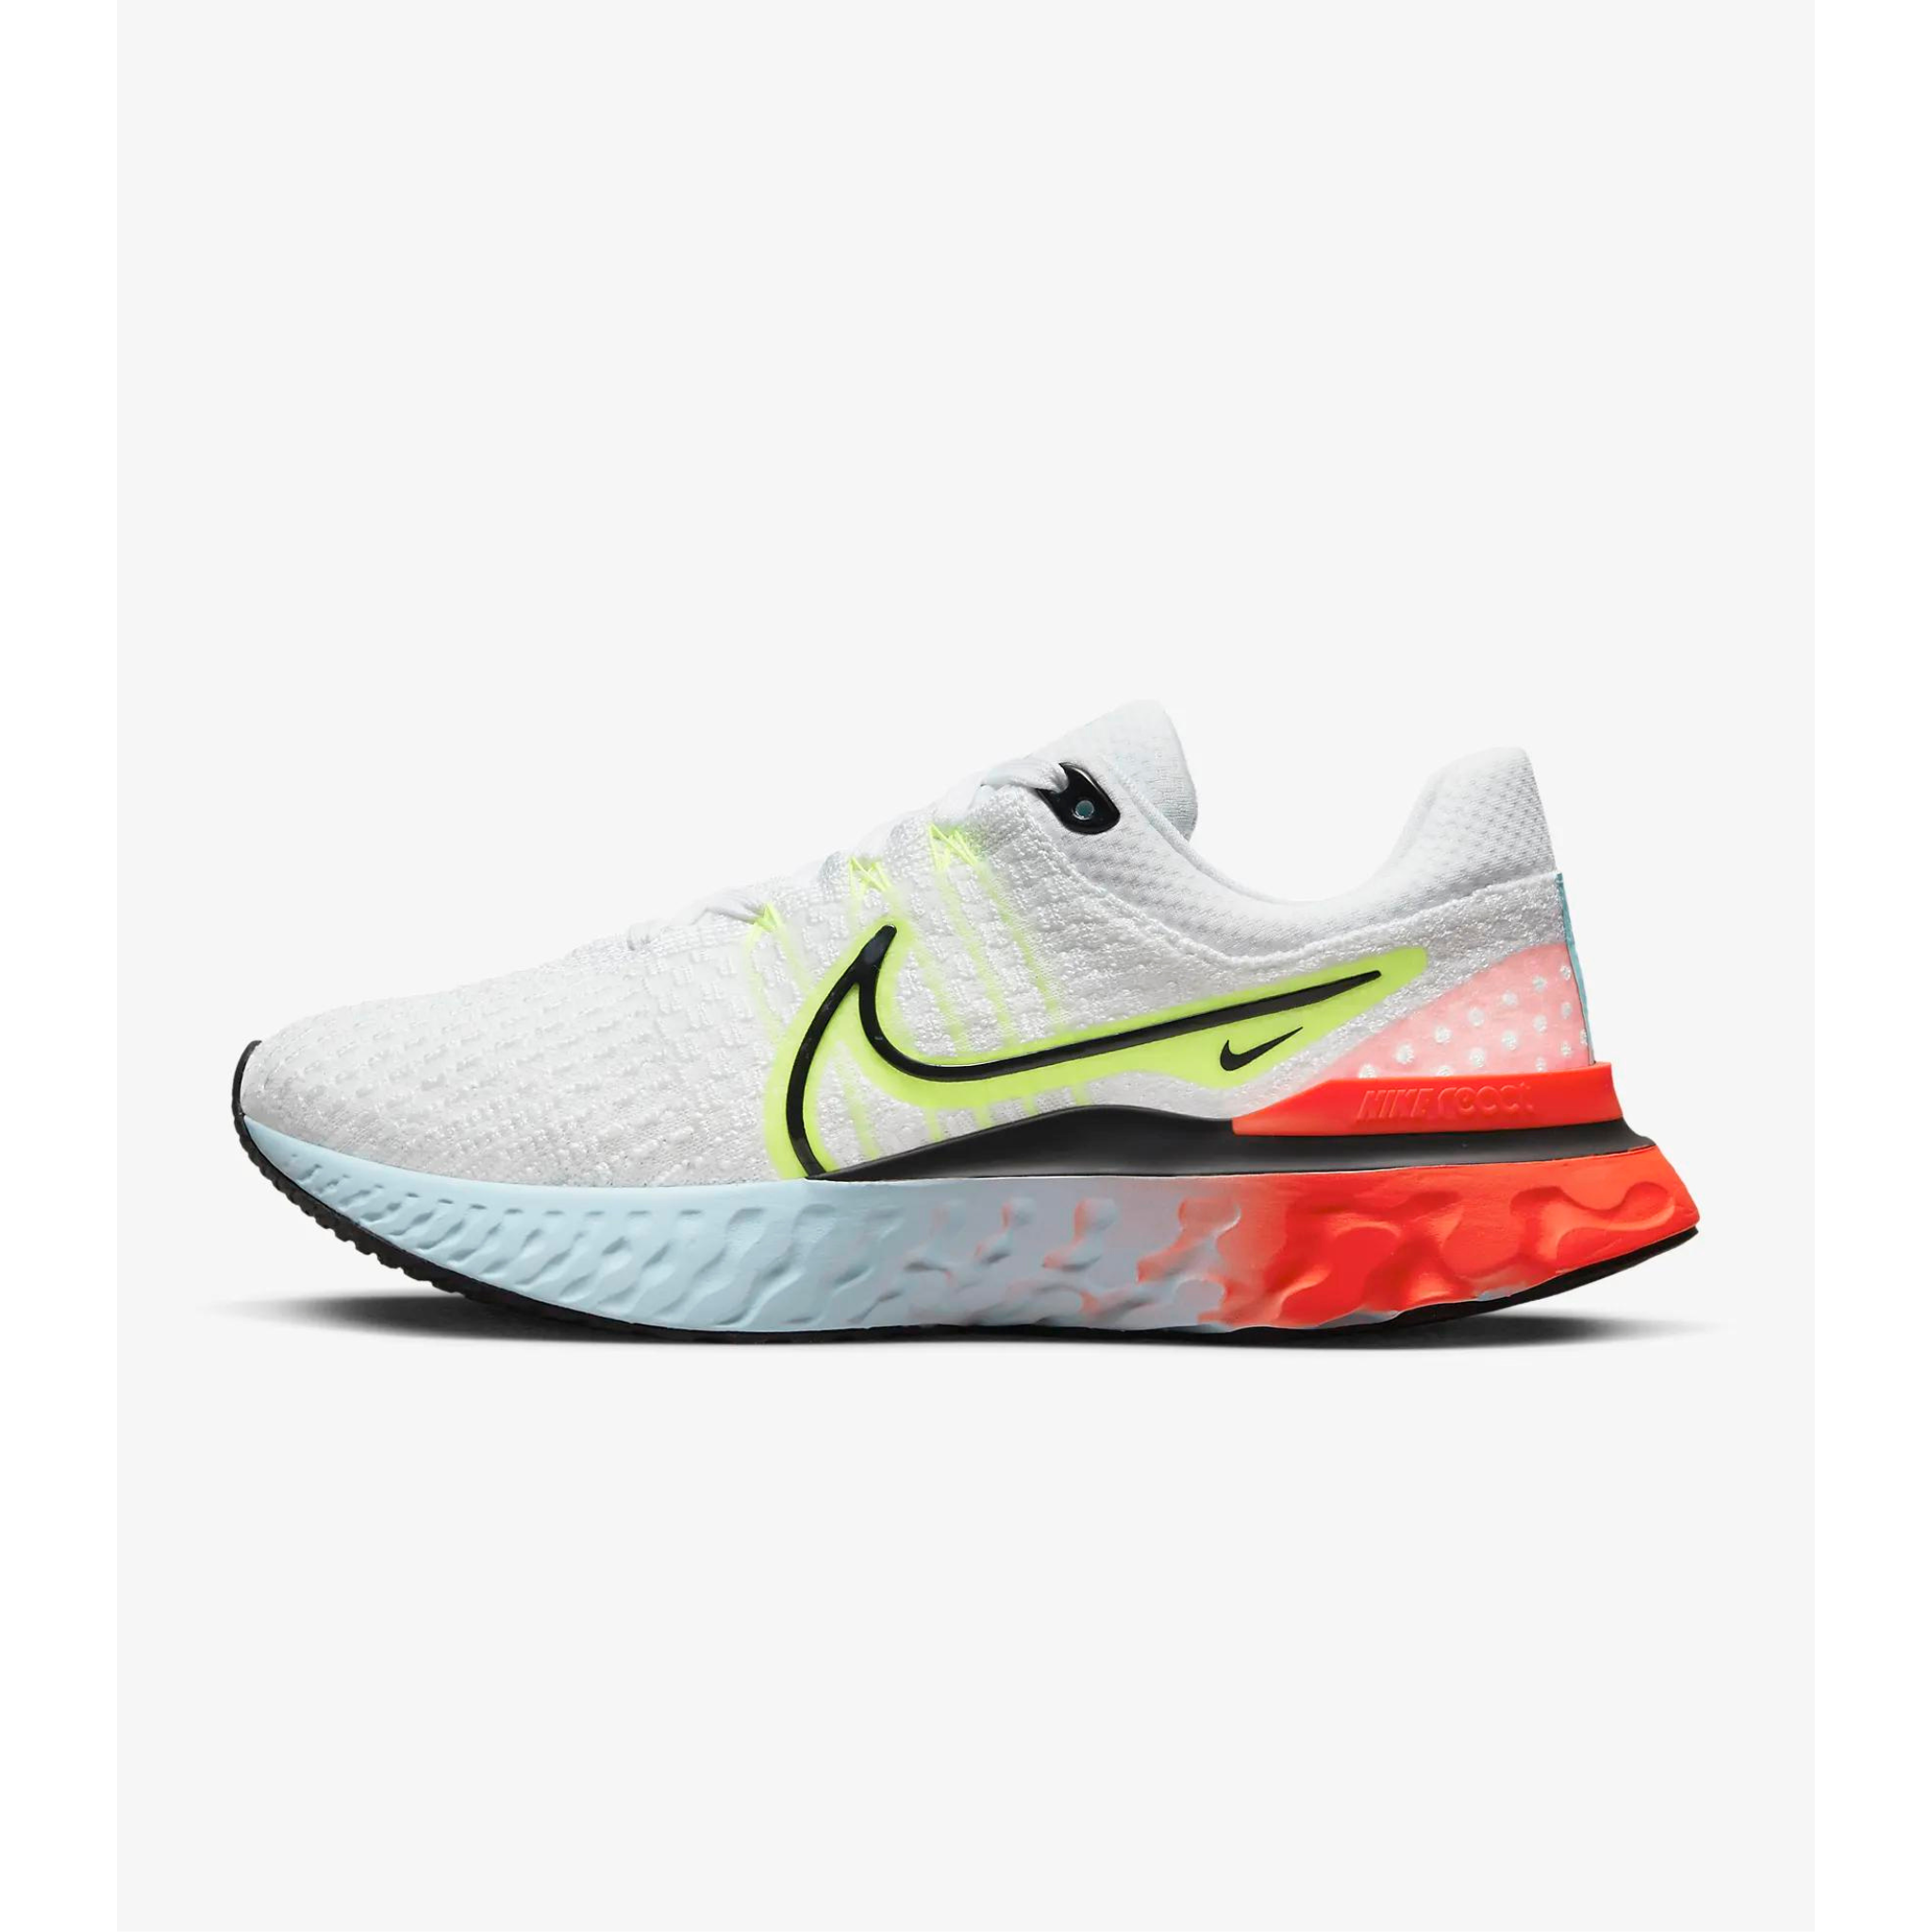 Nike Women's Road Running Shoes (16 COLORS)